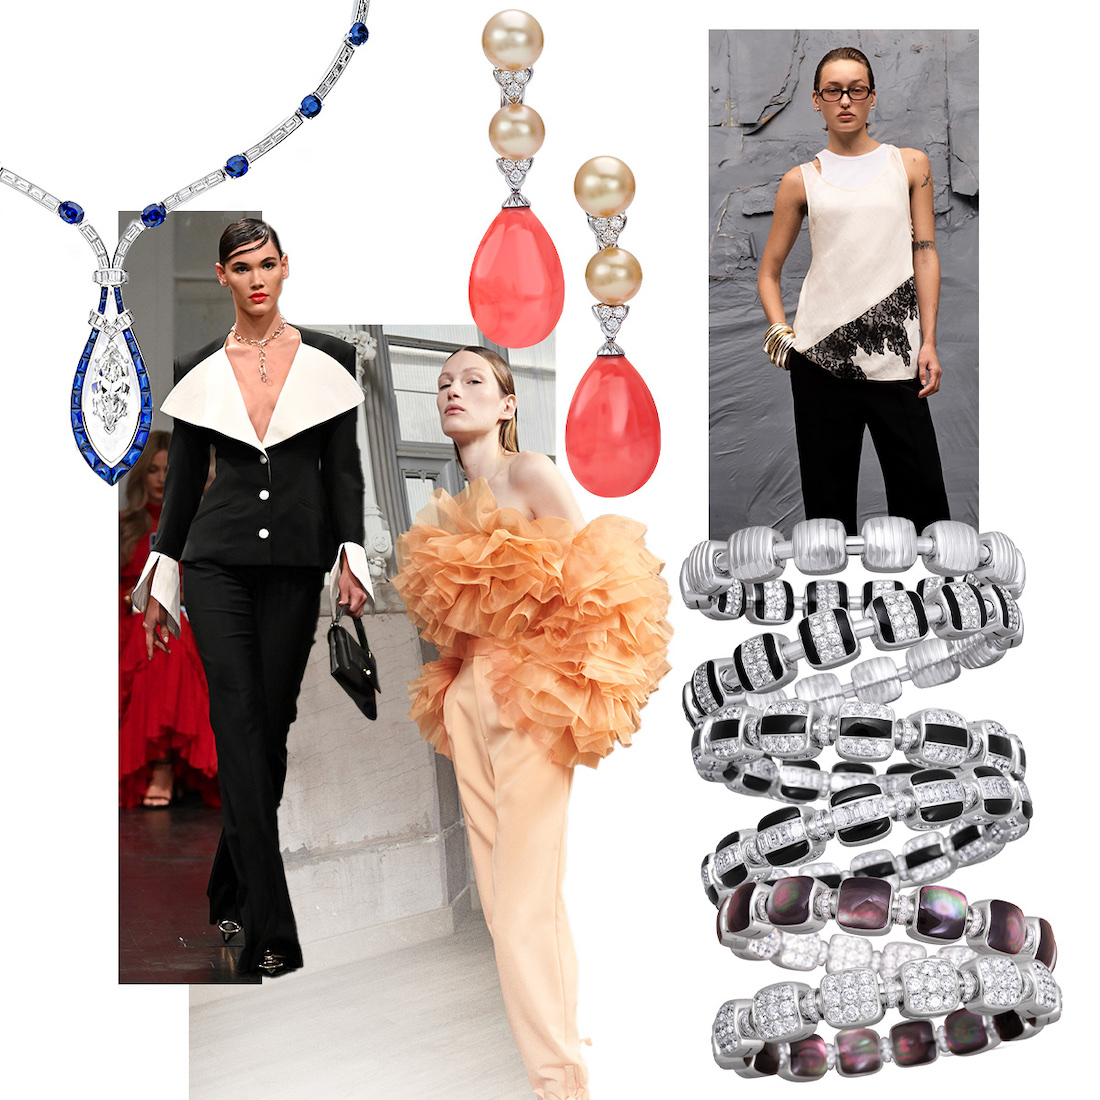 Clockwise from upper left – 3.1 Phillip Lim S/S 2023, PICCHIOTTI Reversible Xpandable bracelets, La Pointe S/S 2023, Christian Siriano S/S 2023, PICCHIOTTI Sapphire & Diamond pendant necklace (can we hyperlink this somewhere?), PICCHIOTTI Essentially Color Coral and Golden South Sea Pearl earrings